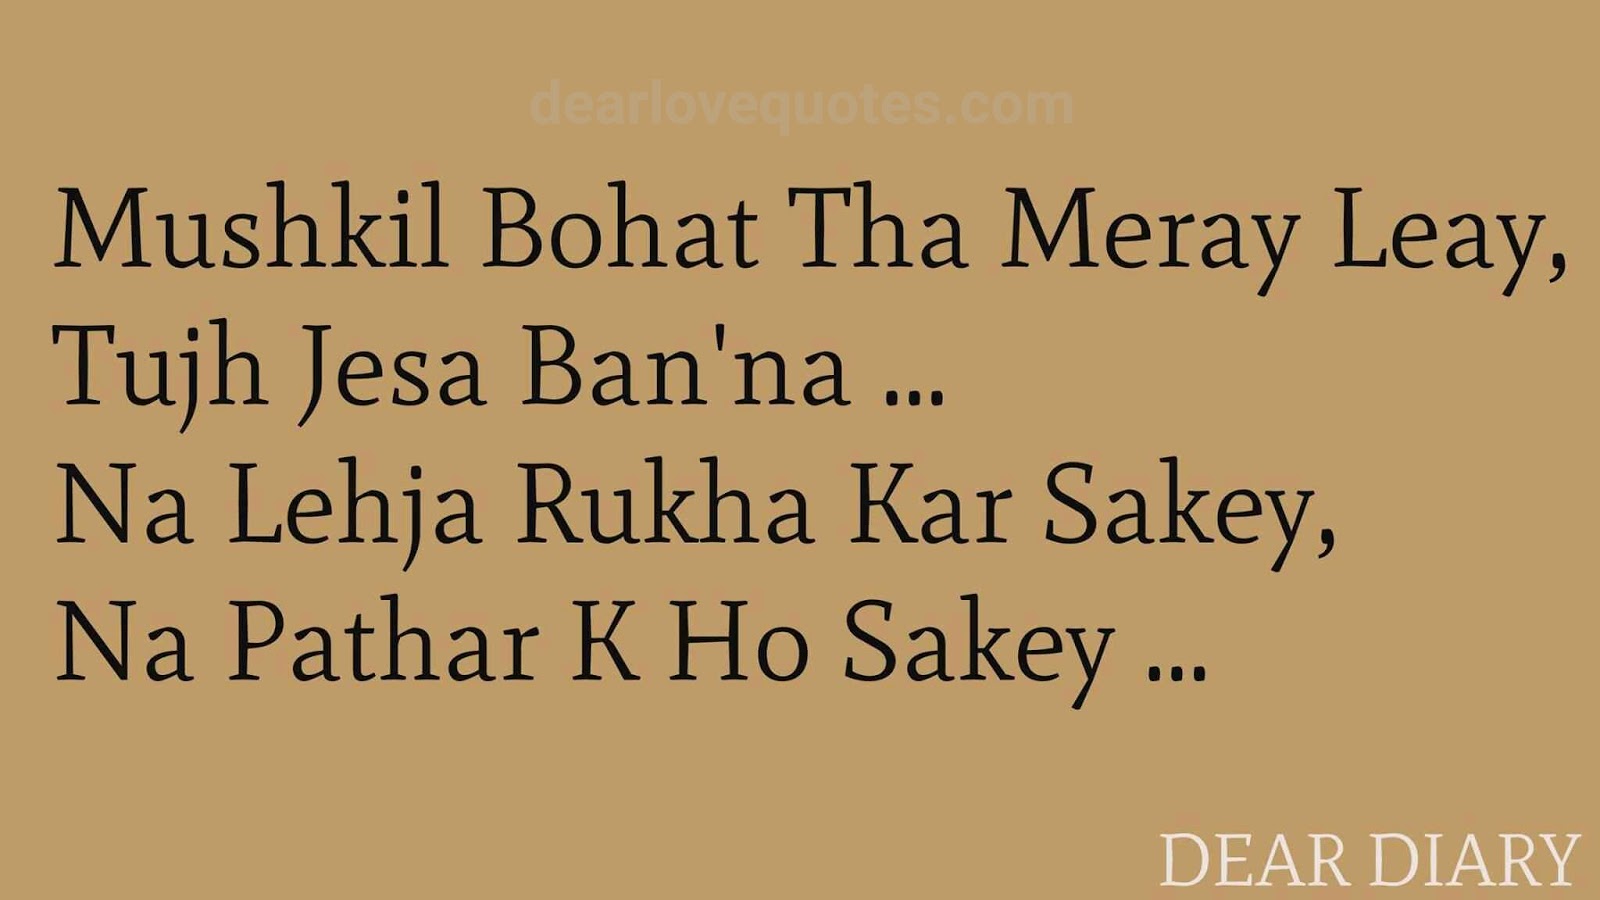 Sad Quotes From Dear Diary Dear diary images with love quotes shayari and status